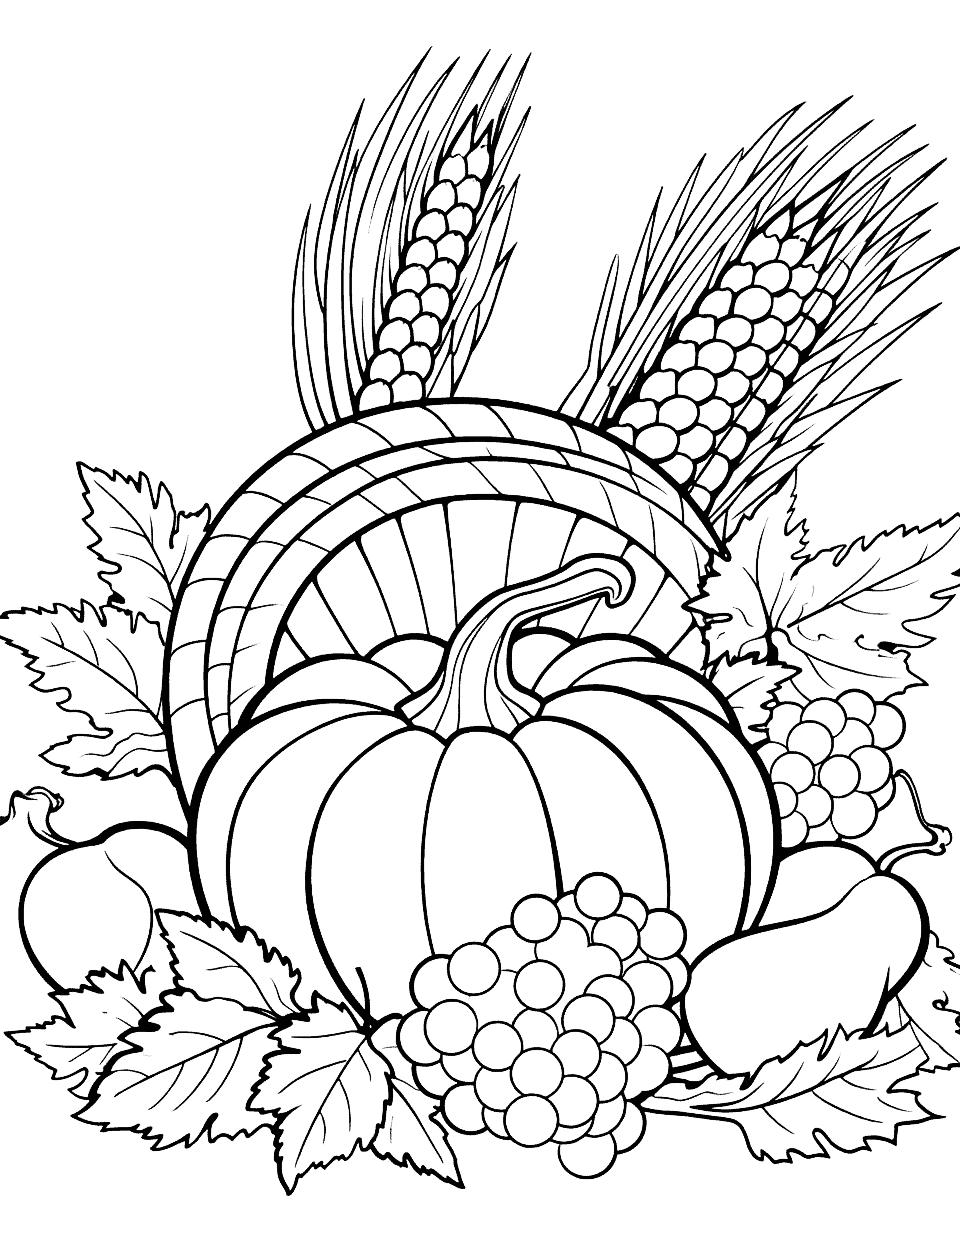 Detailed Cornucopia with Fall Elements Thanksgiving Coloring Page - A complex cornucopia design featuring fall elements, designed for older kids.